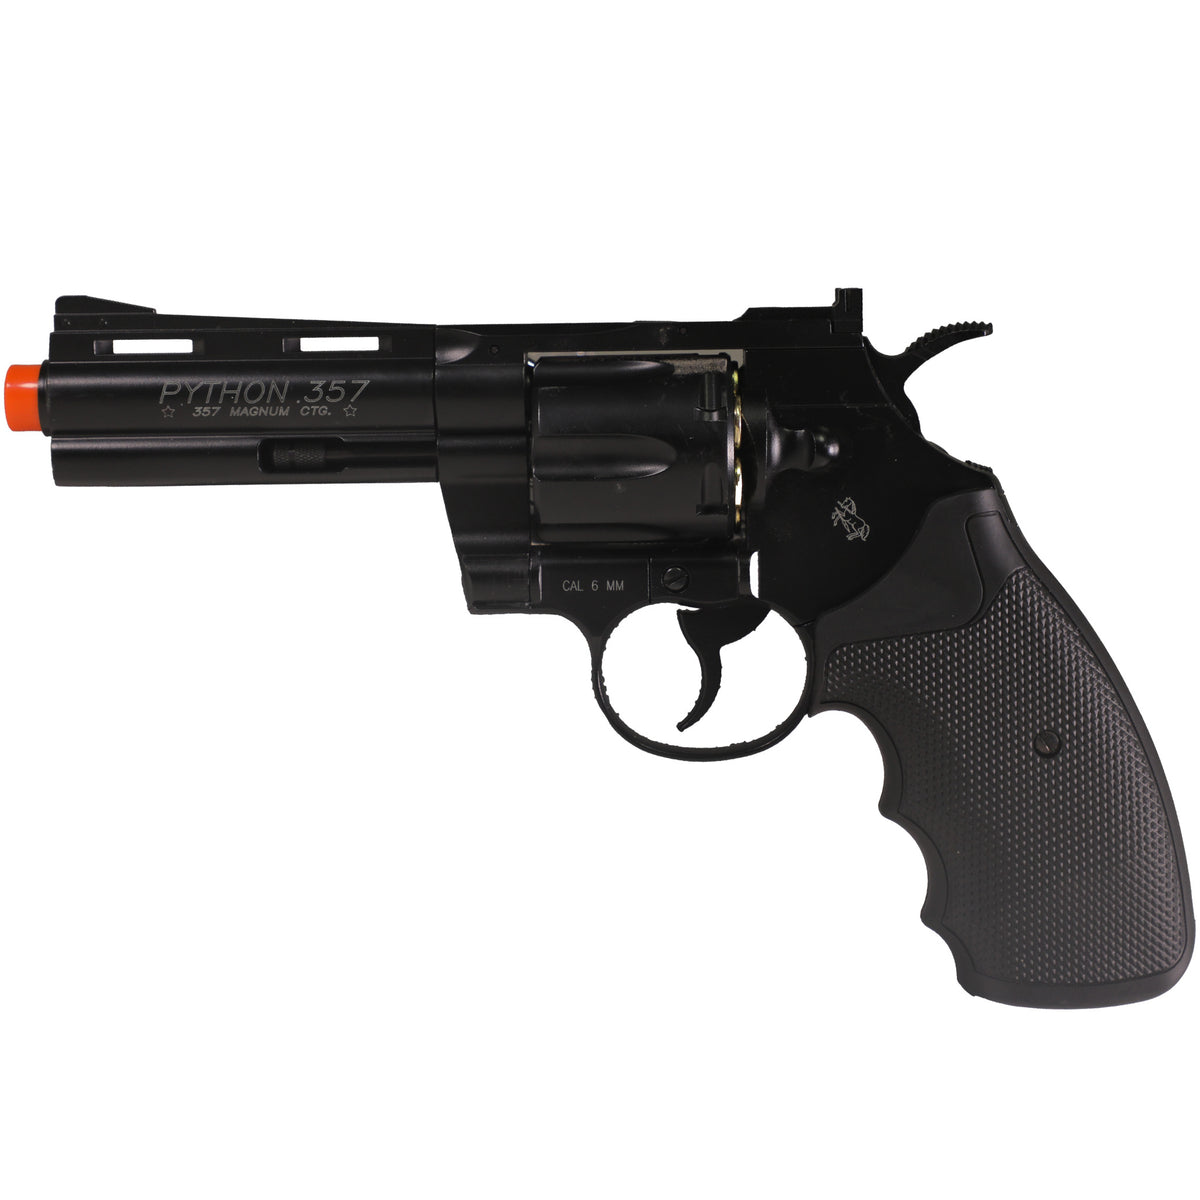 Colt Python Full Metal .357 Magnum High Power Airsoft CO2 Revolver by Cybergun (Length: 4&quot; / High Power)